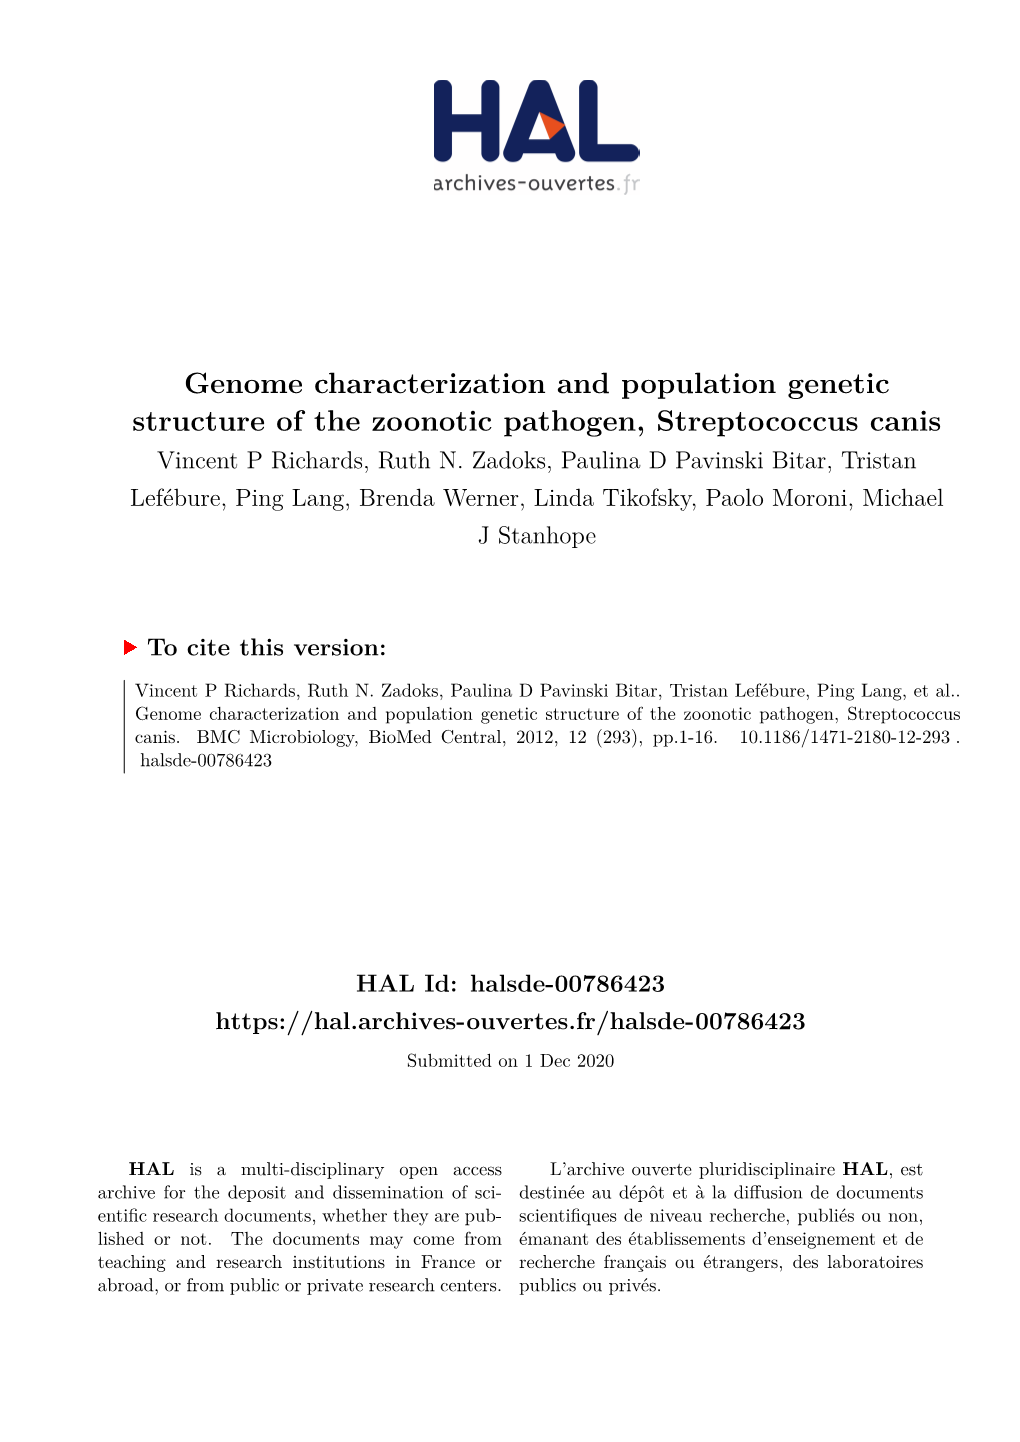 Genome Characterization and Population Genetic Structure of the Zoonotic Pathogen, Streptococcus Canis Vincent P Richards, Ruth N